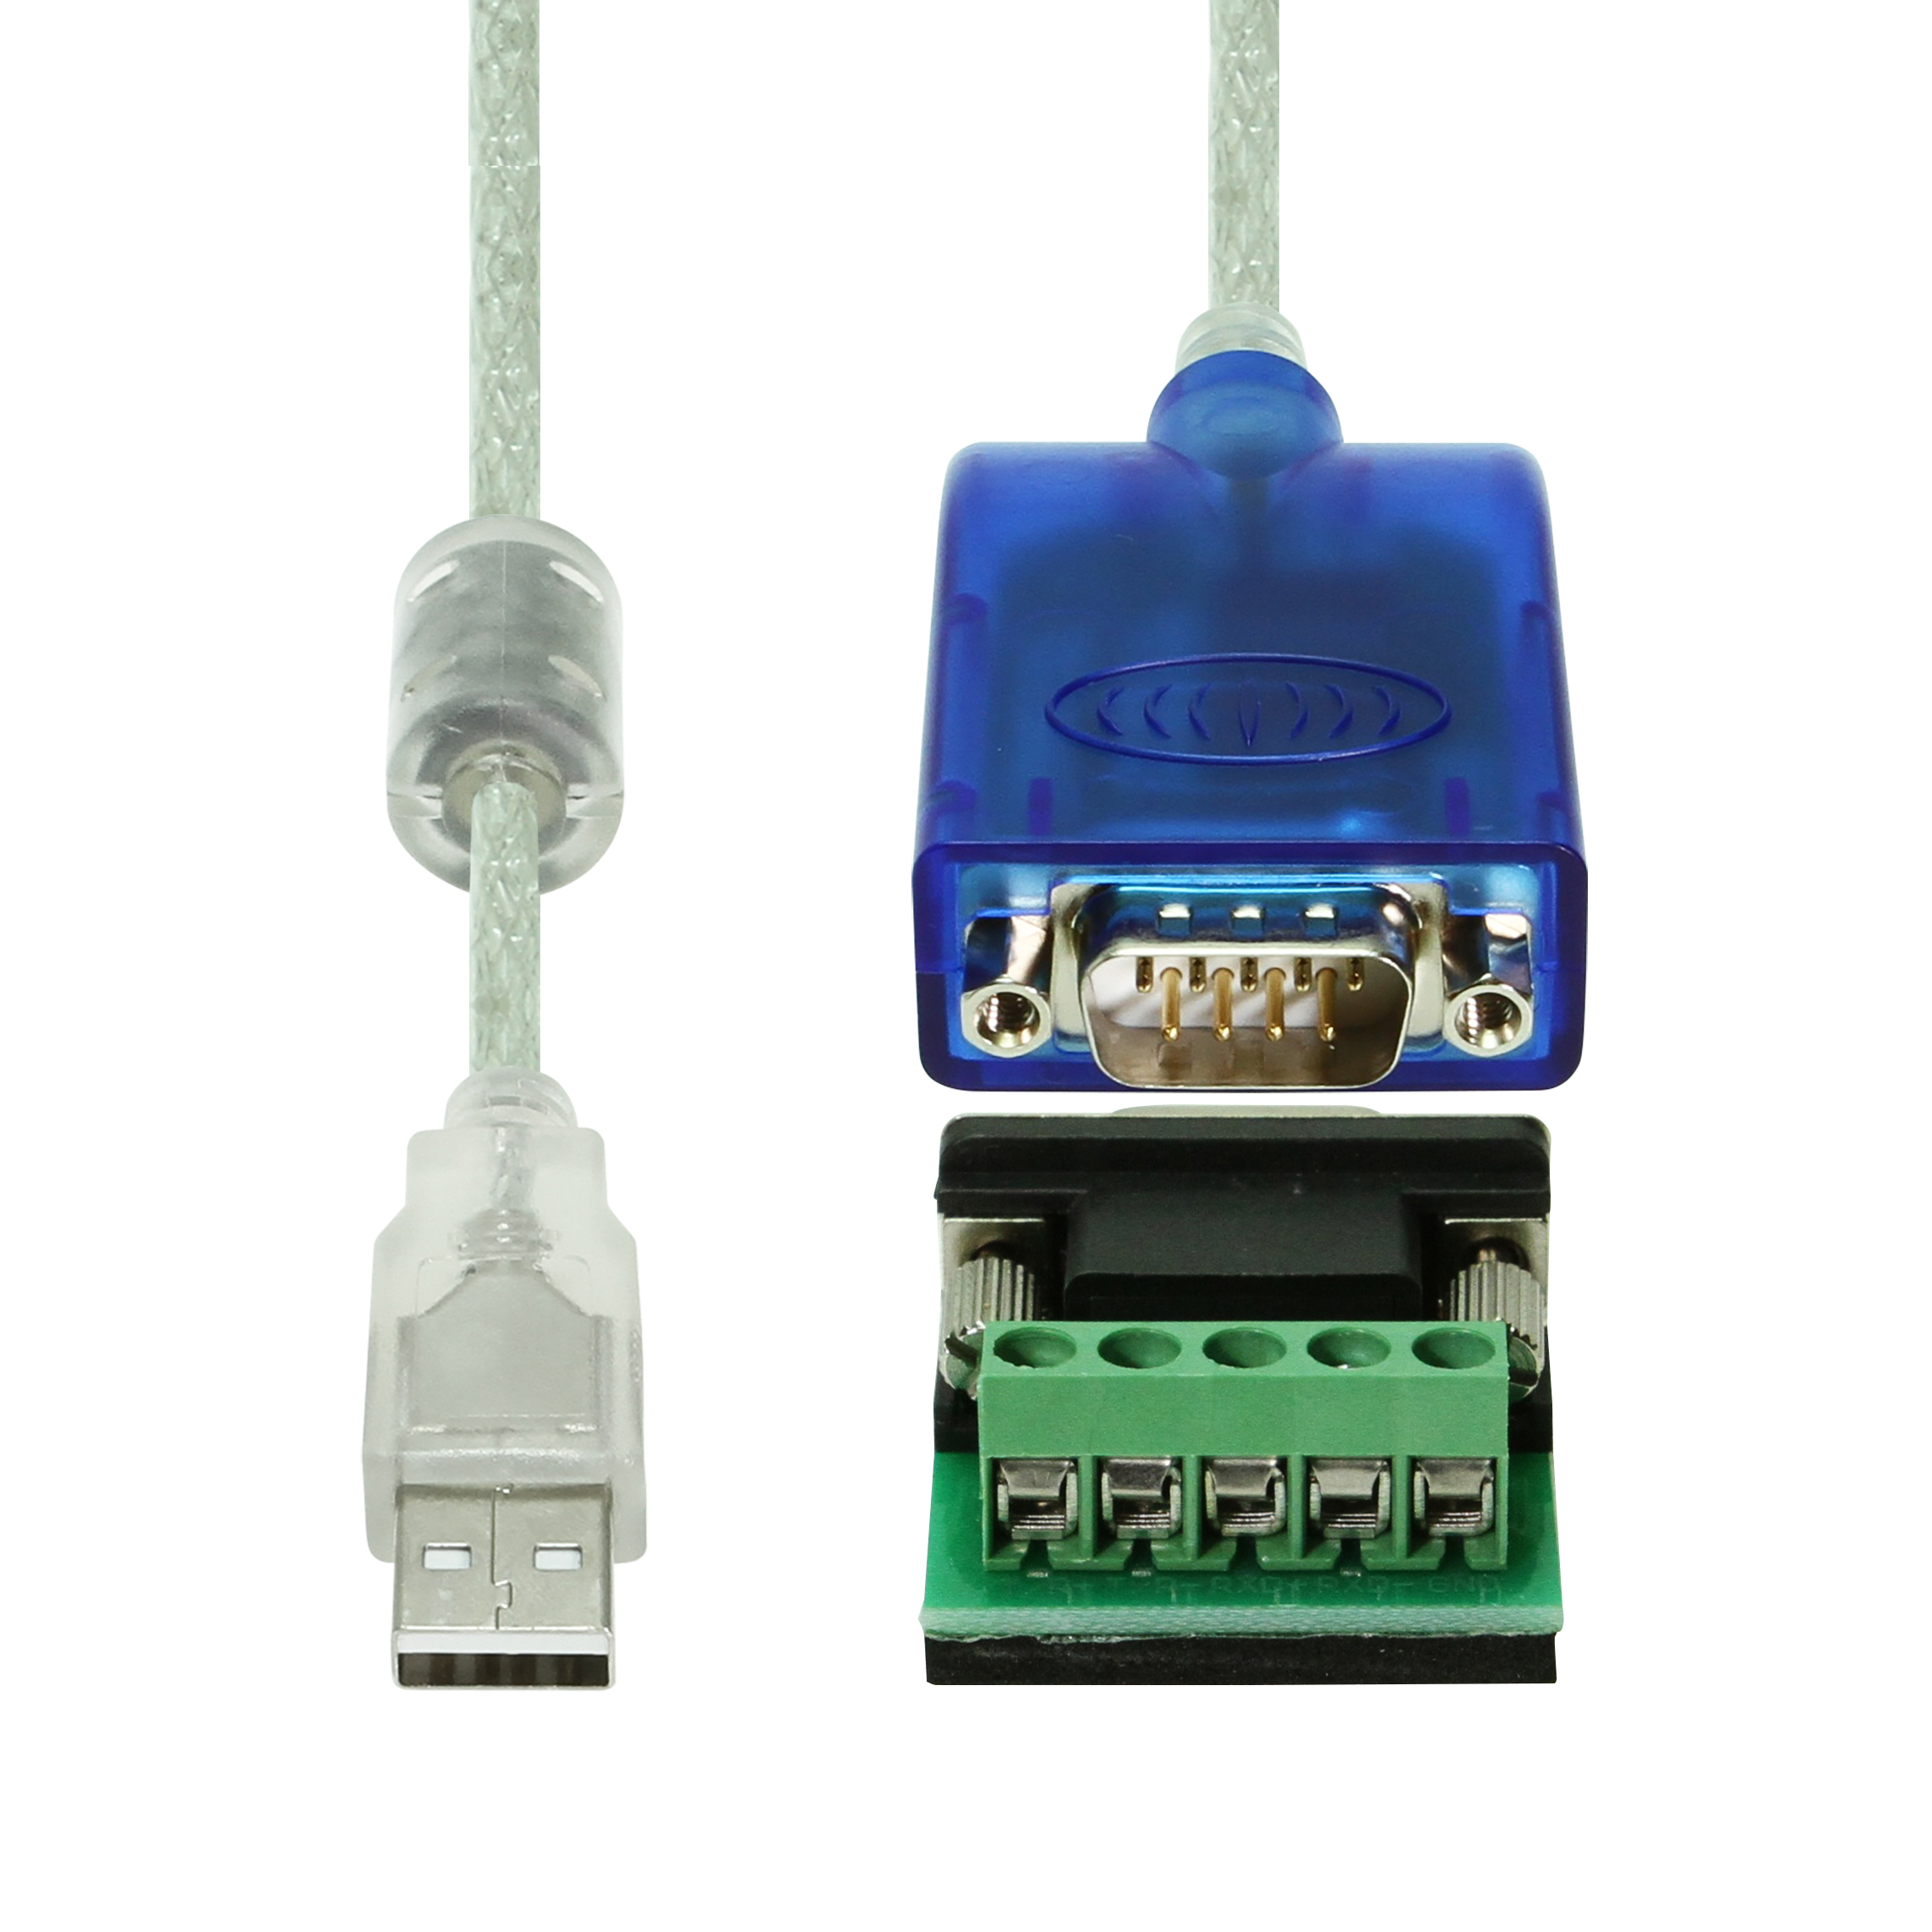 USB to RS485-RS422 converter with FTDI Chip and USB Cable